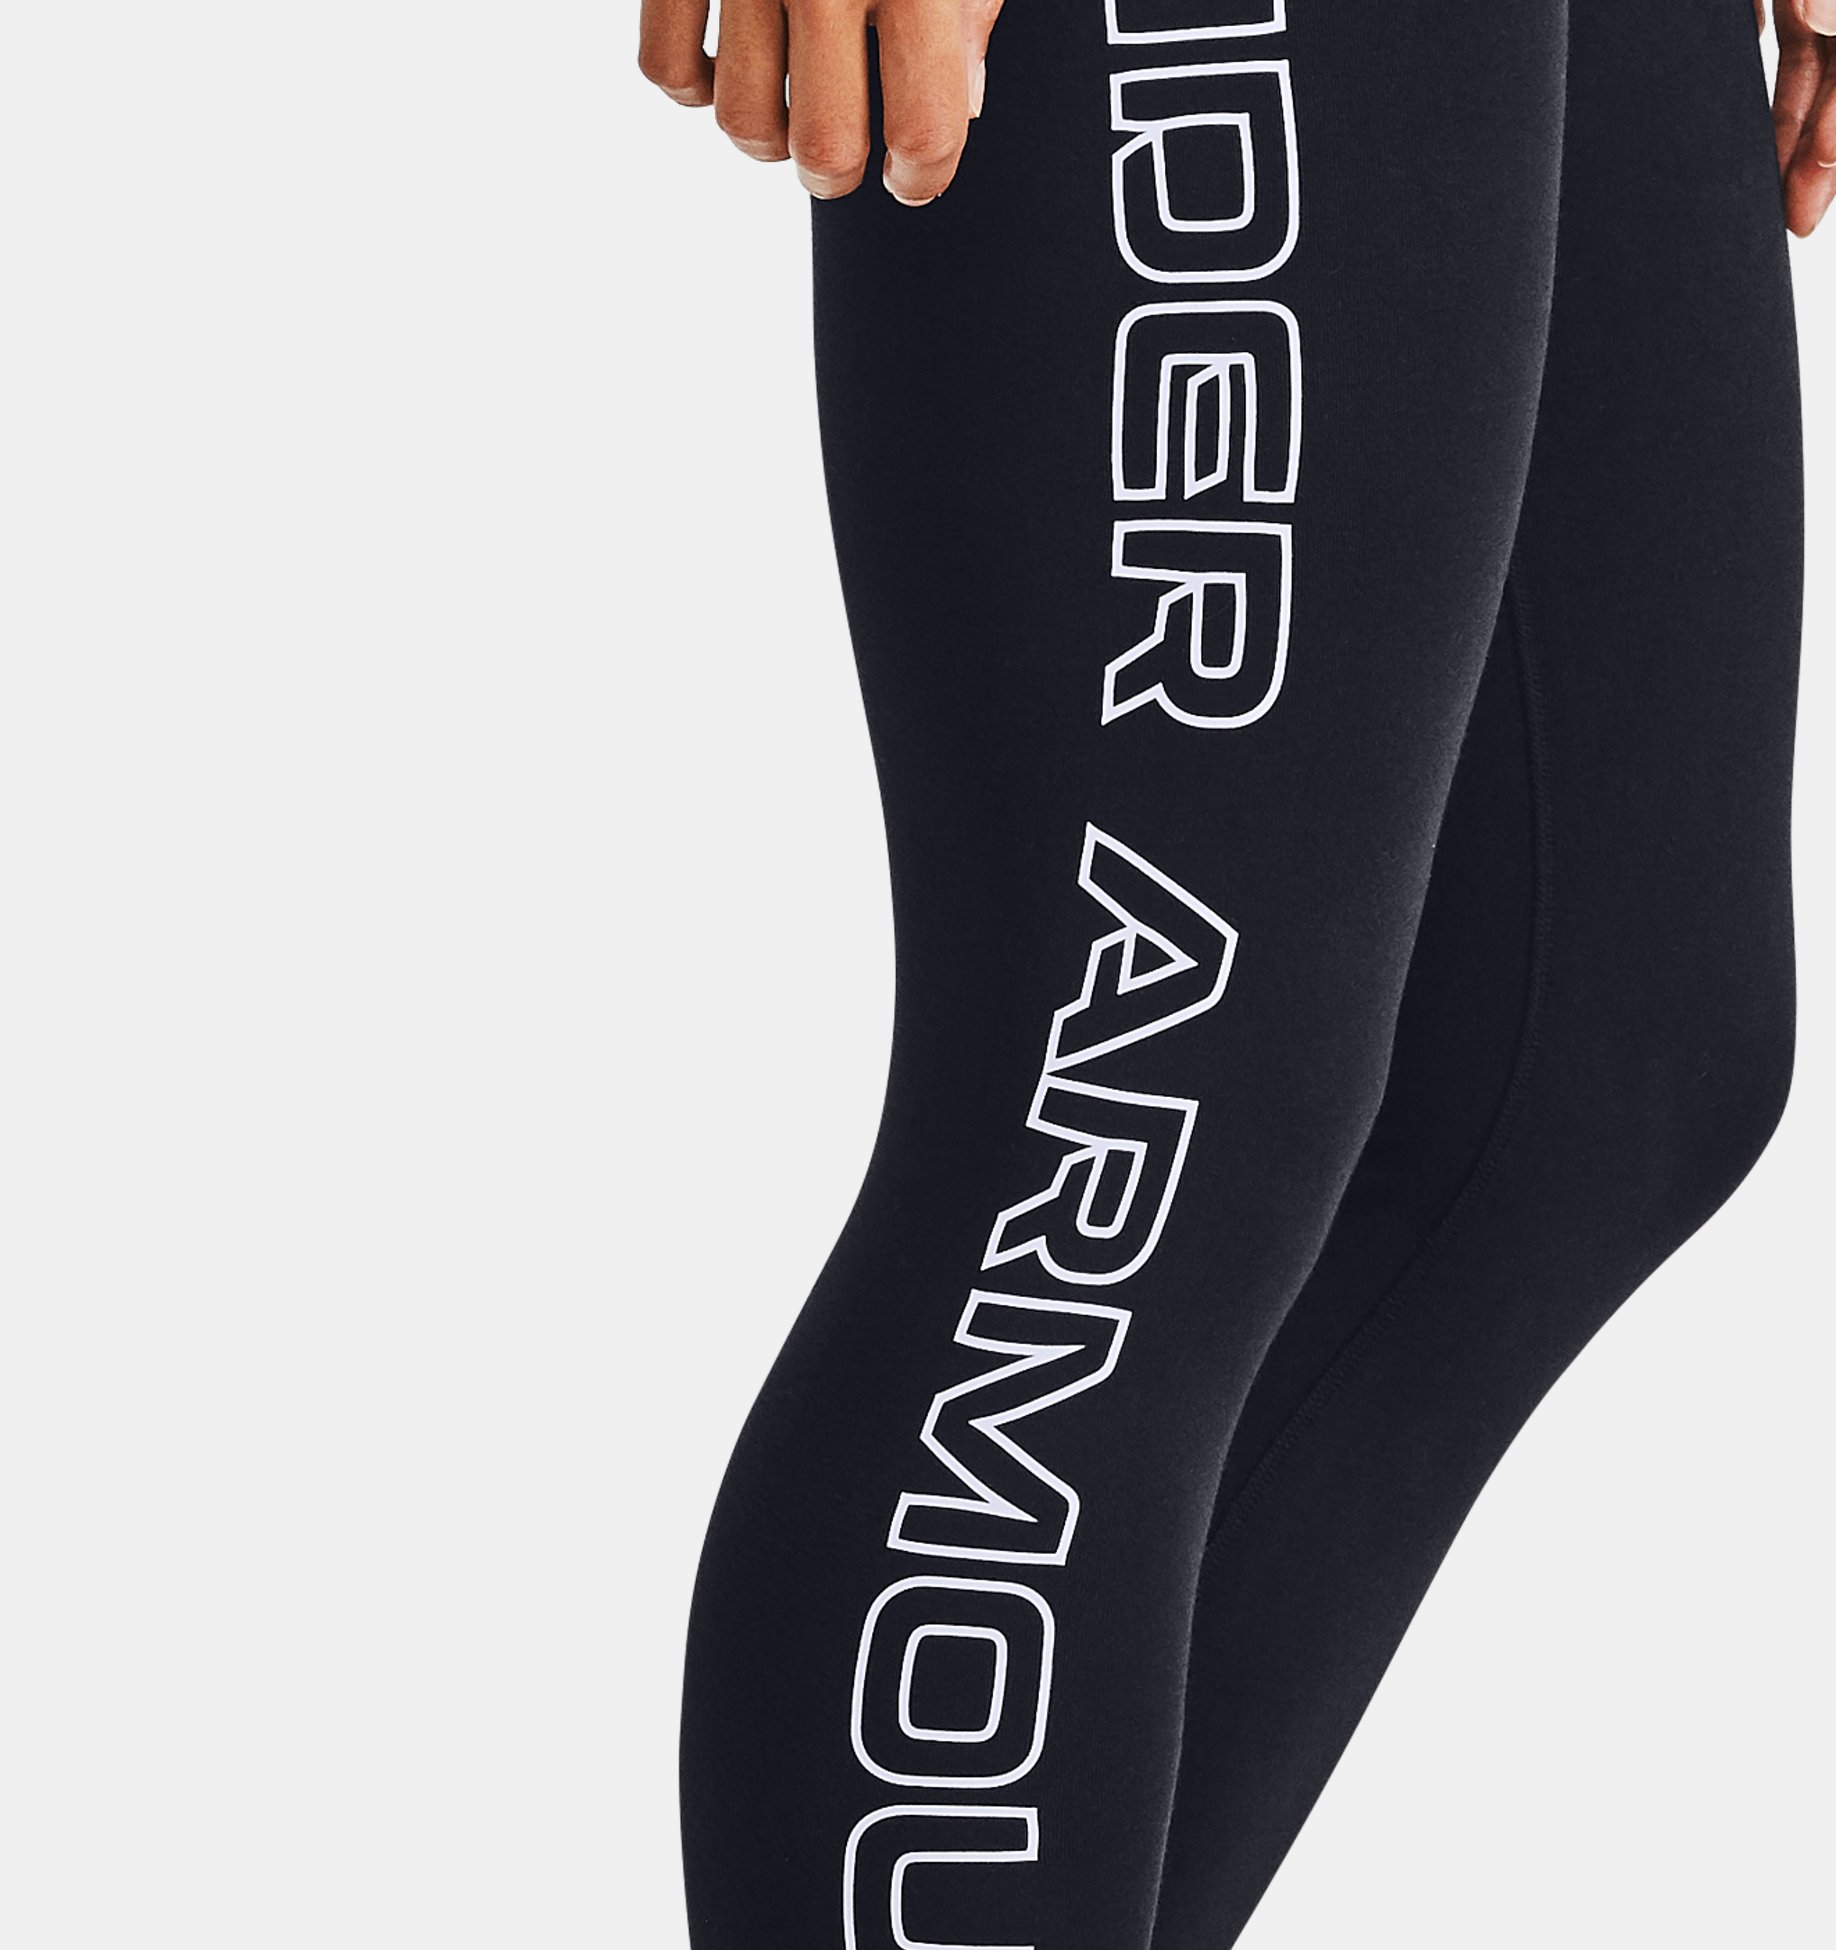 https://underarmour.scene7.com/is/image/Underarmour/V5-1356403-001_SC_Main?rp=standard-0pad|pdpZoomDesktop&scl=0.72&fmt=jpg&qlt=85&resMode=sharp2&cache=on,on&bgc=f0f0f0&wid=1836&hei=1950&size=1500,1500